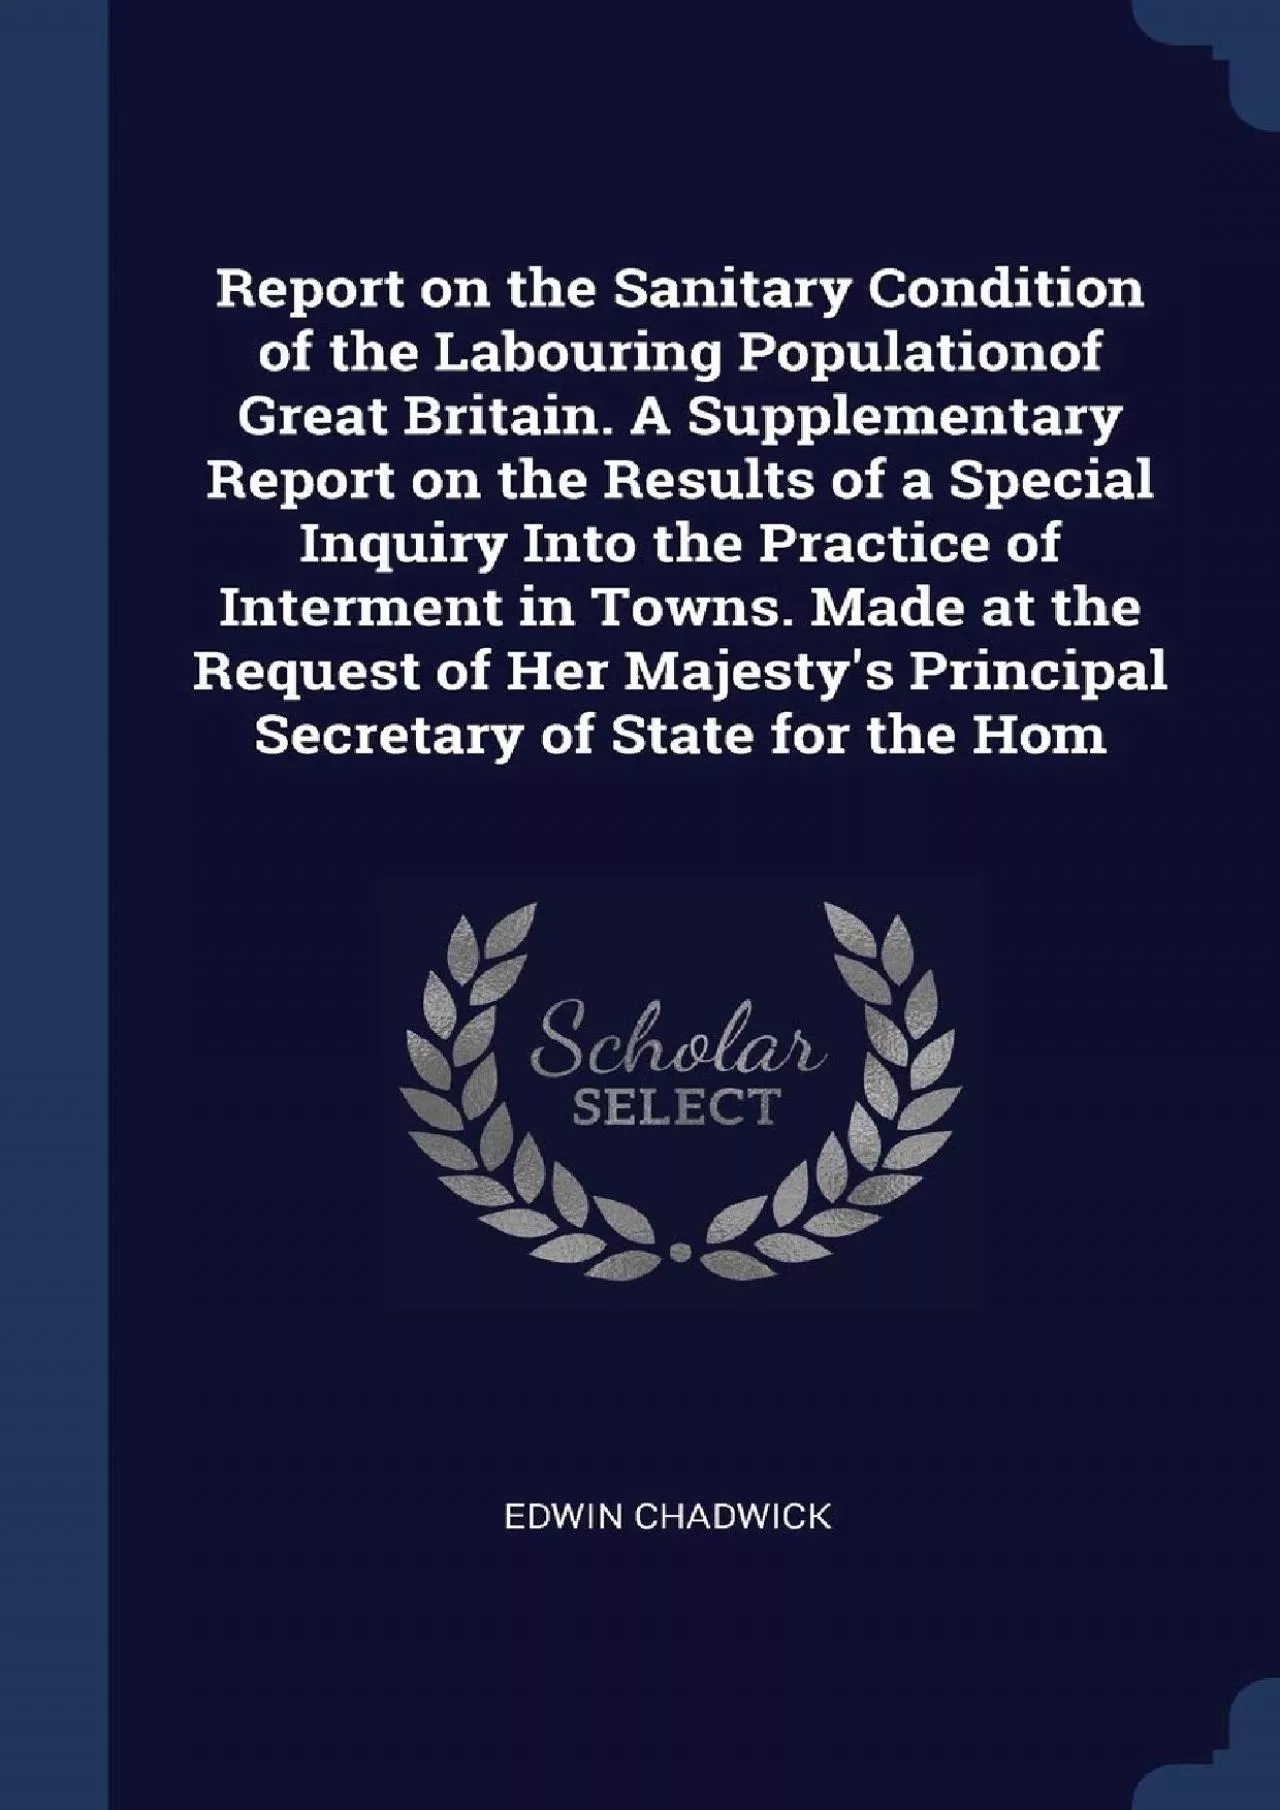 (BOOK)-Report on the Sanitary Condition of the Labouring Populationof Great Britain. A